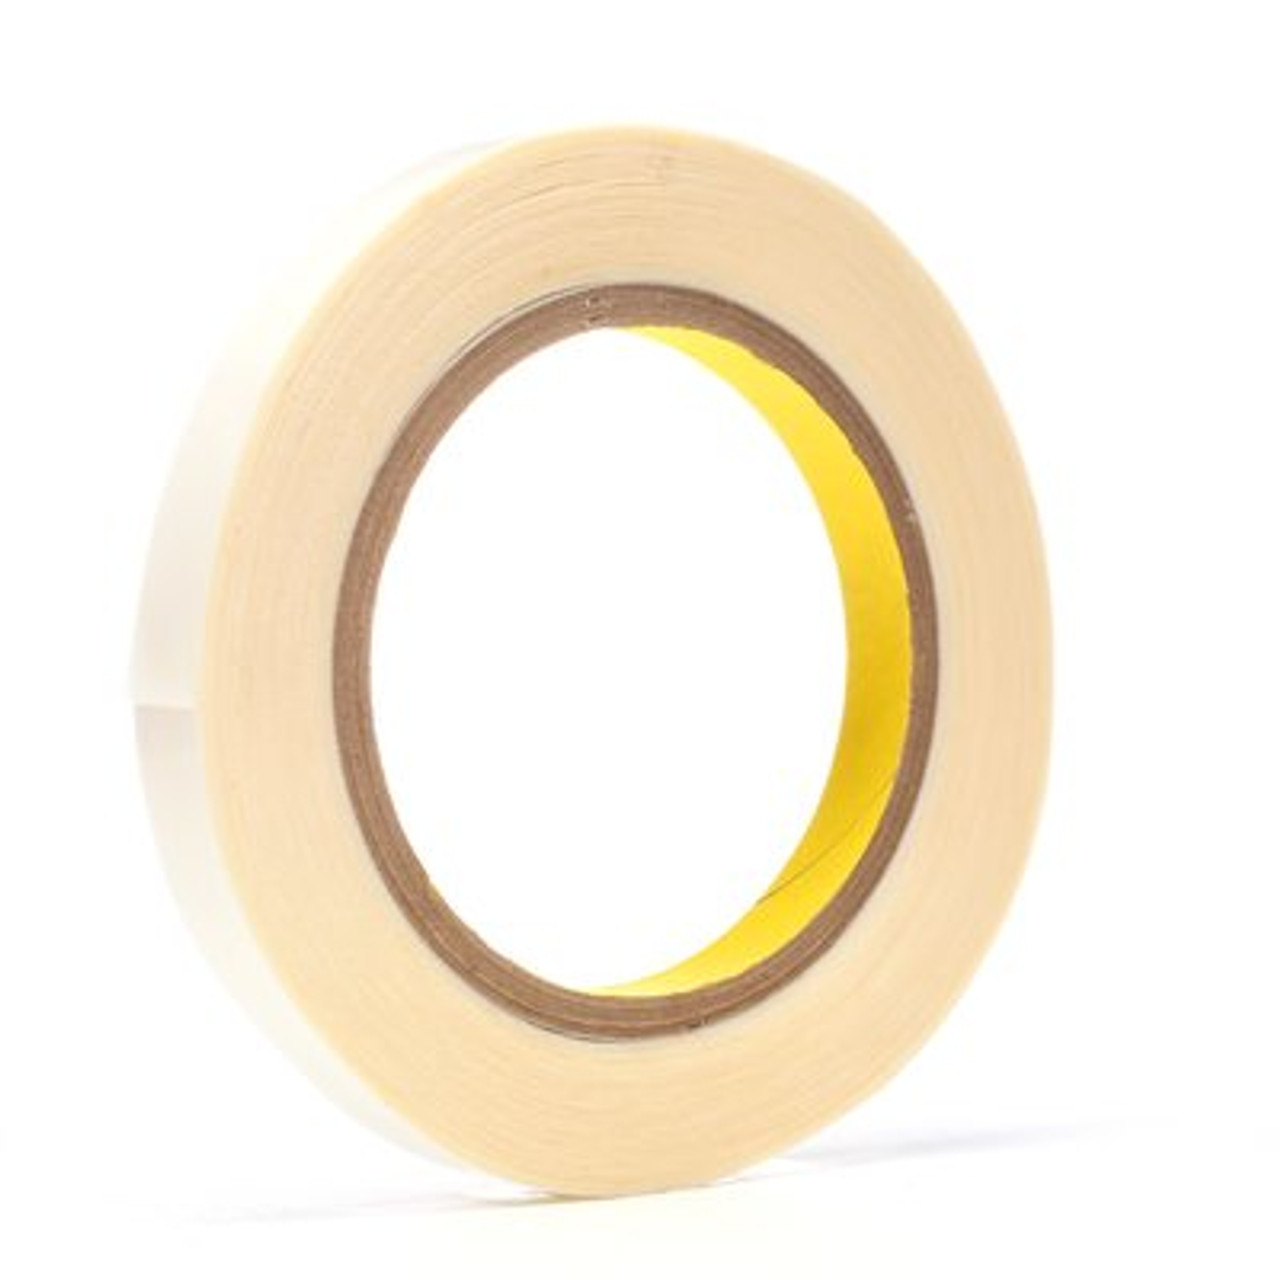 3M™ Double Coated Tape 444 Clear, 1/2 in x 36 yd 3.9 mil